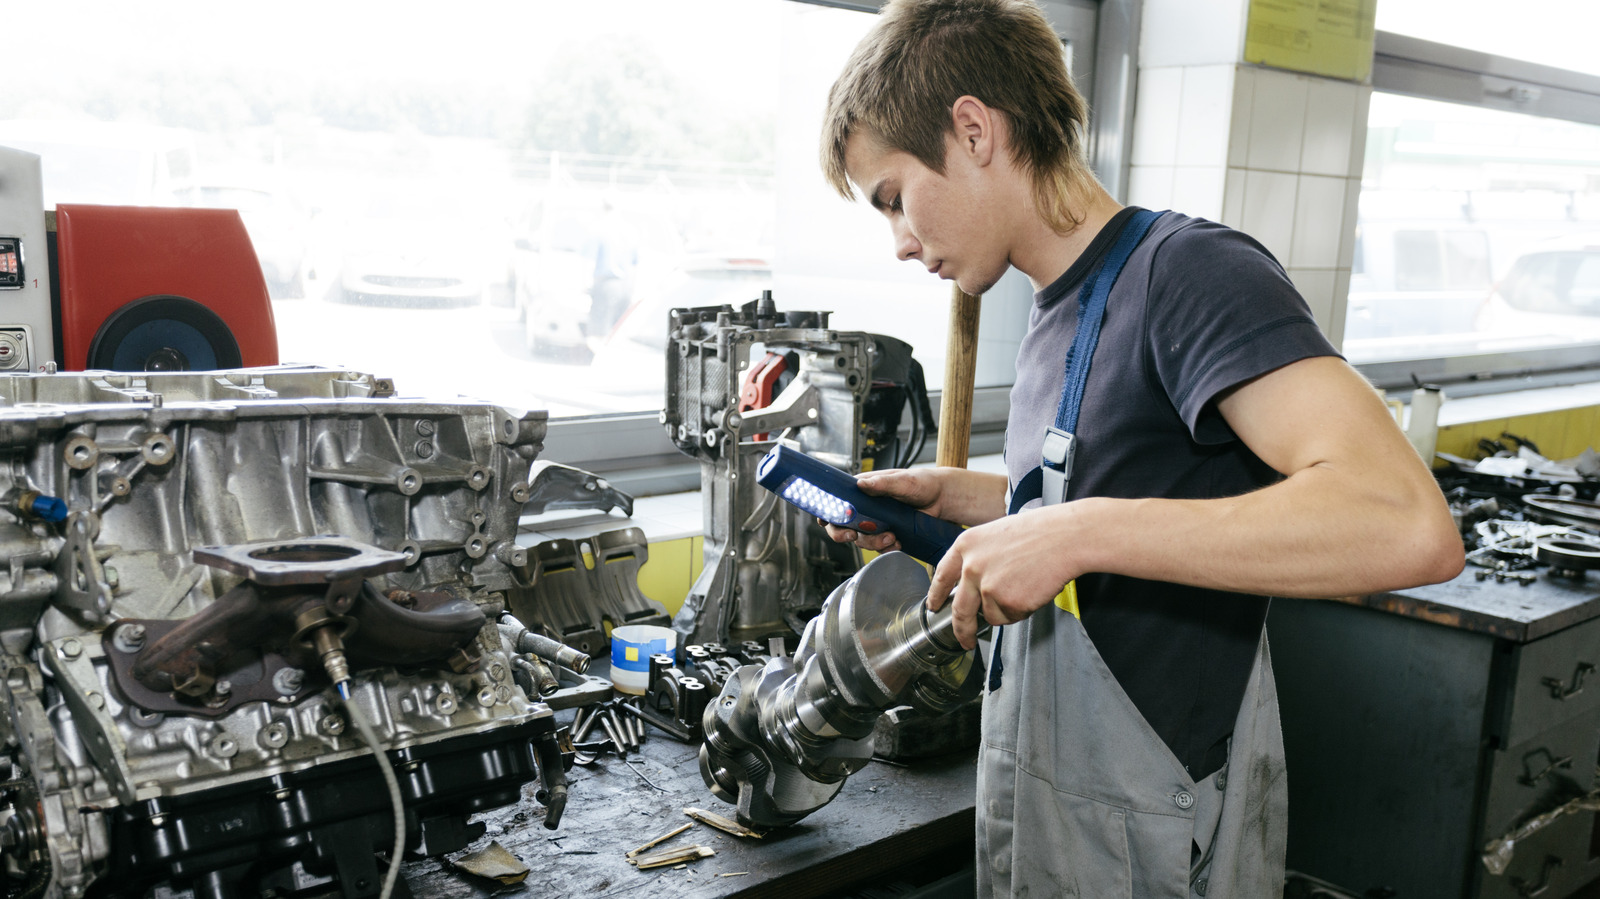 6 Common Mistakes People Make When Rebuilding Engines